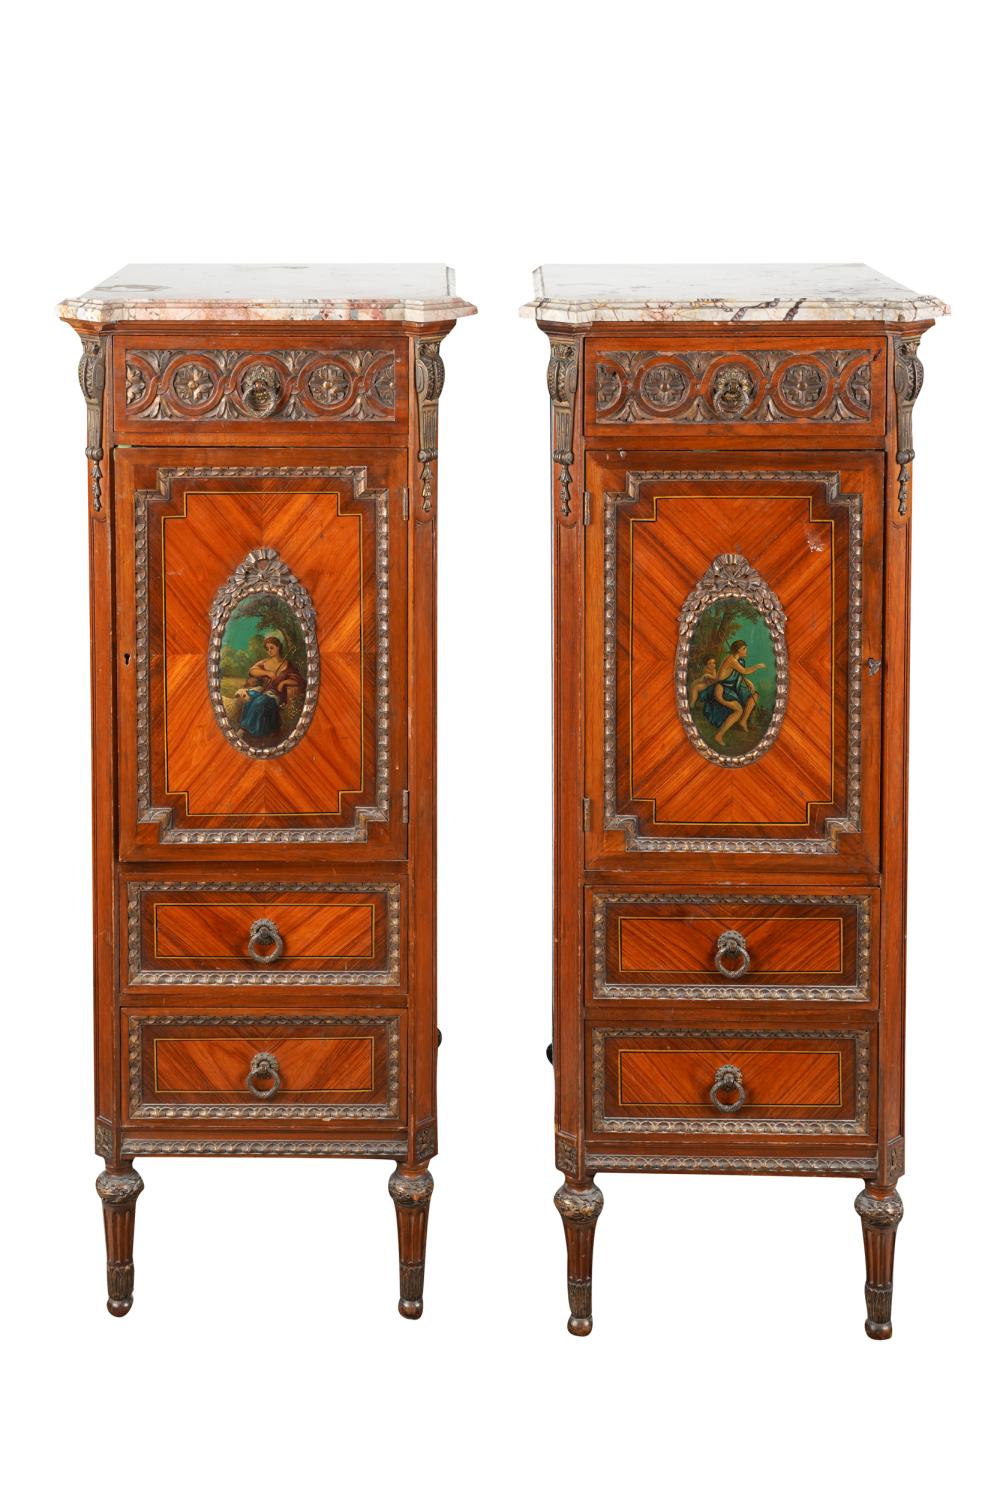 PAIR OF NARROW FRENCH MARBLE TOP 33318c